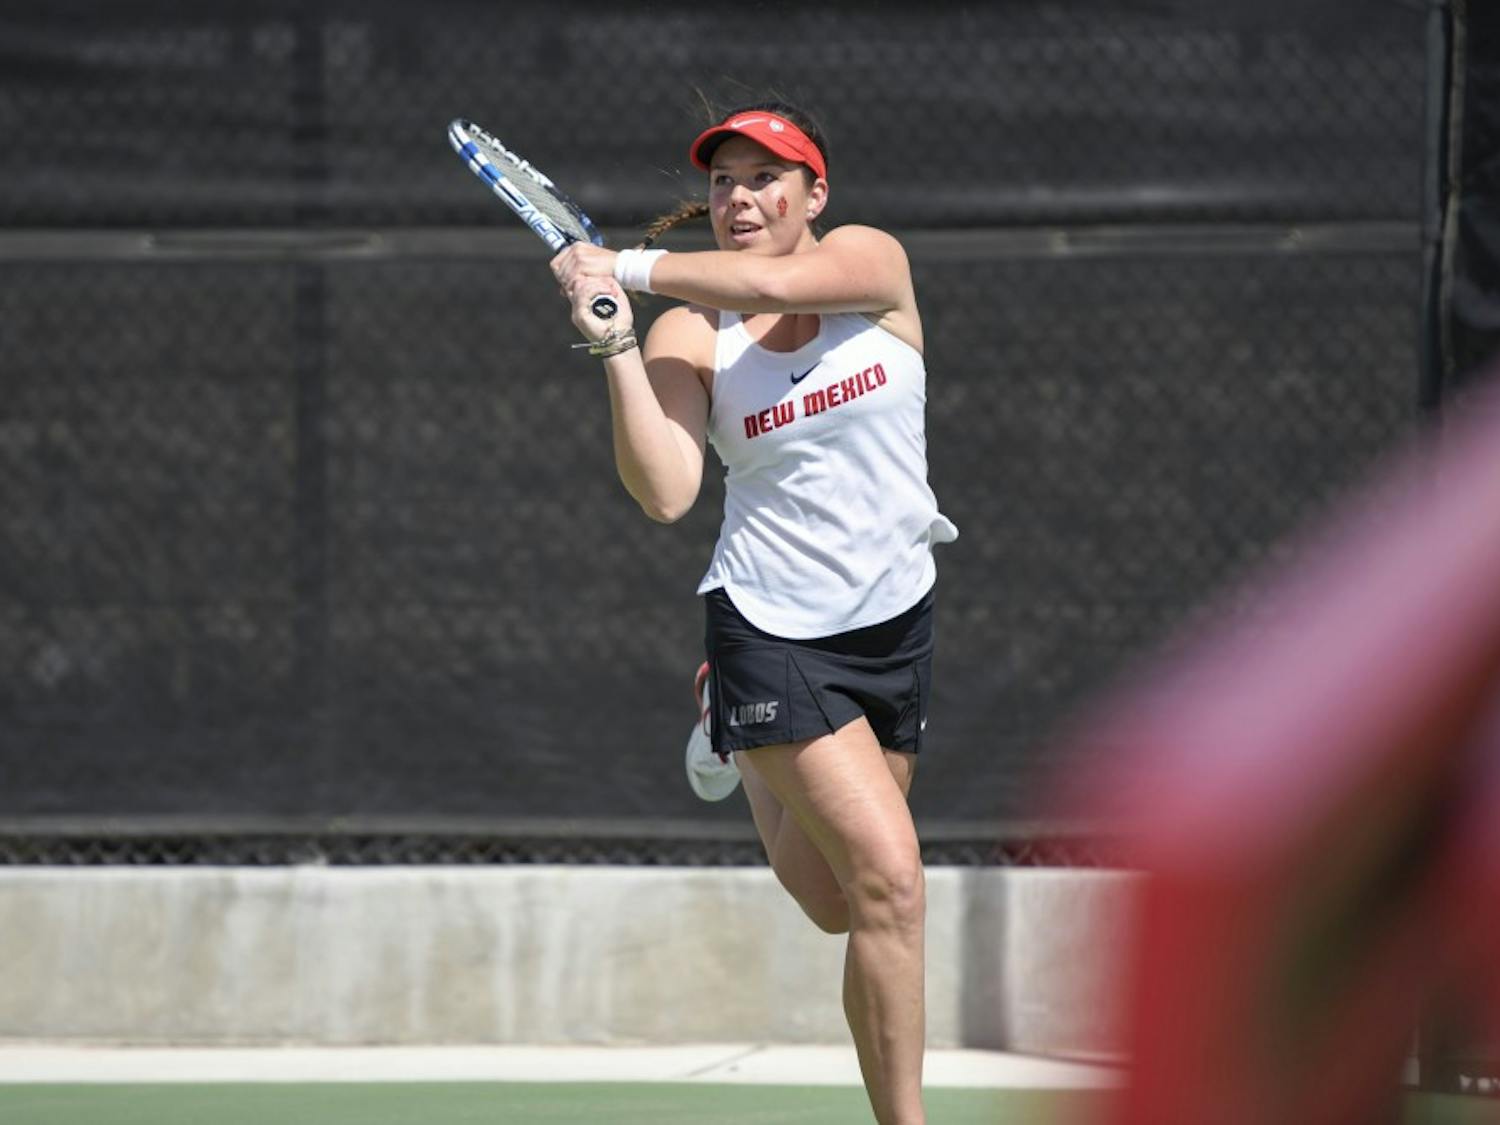 Ruth Copas serves against New Mexico State&nbsp;on March 25, 2017 at the McKinnon Family Tennis Center. Copas will be the only upperclassman for the tennis team the next tennis season.